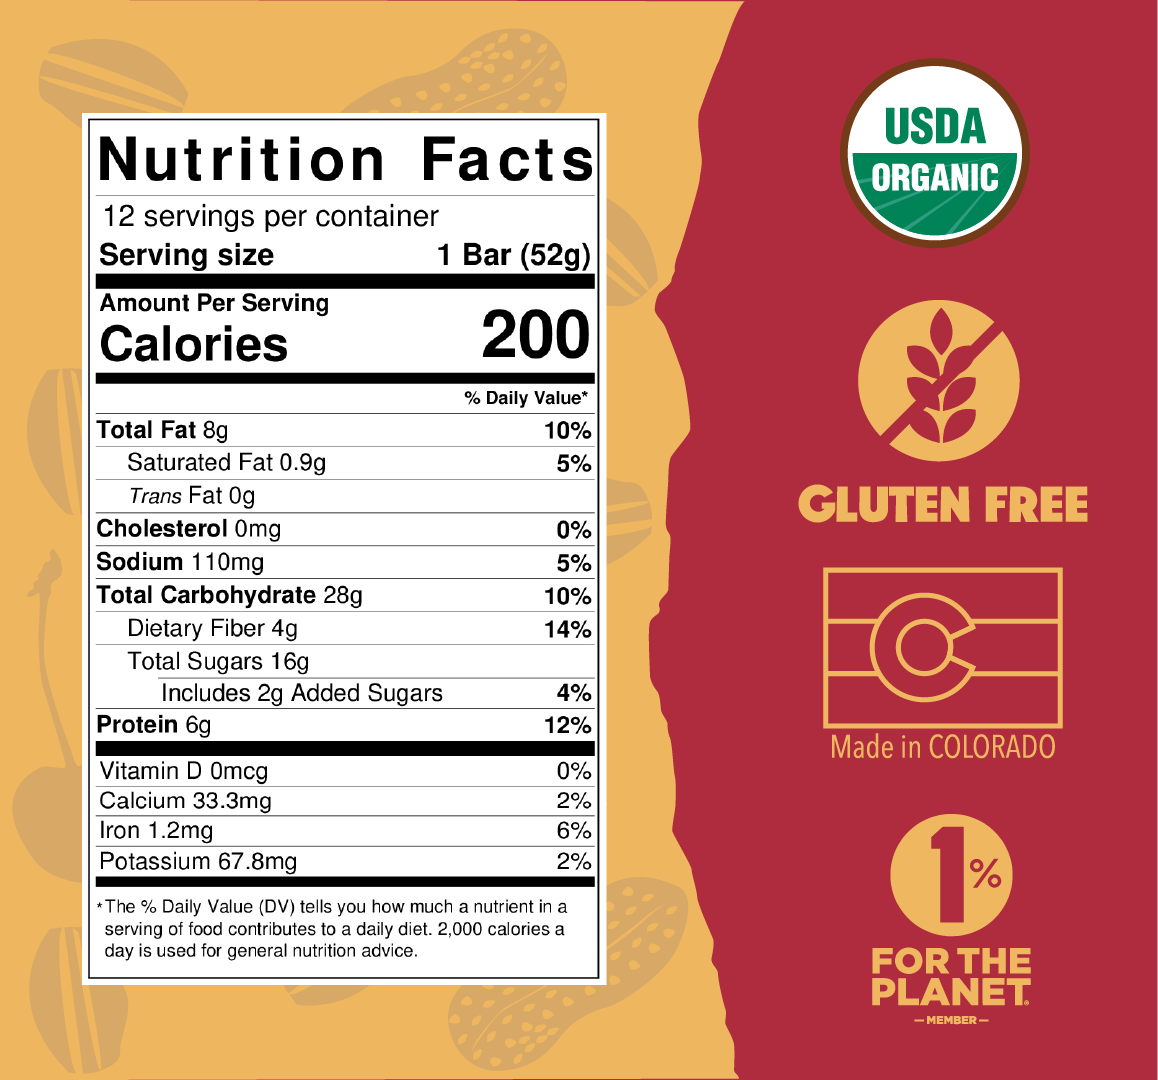 Peanuts n cherries nutrition facts with organic certification